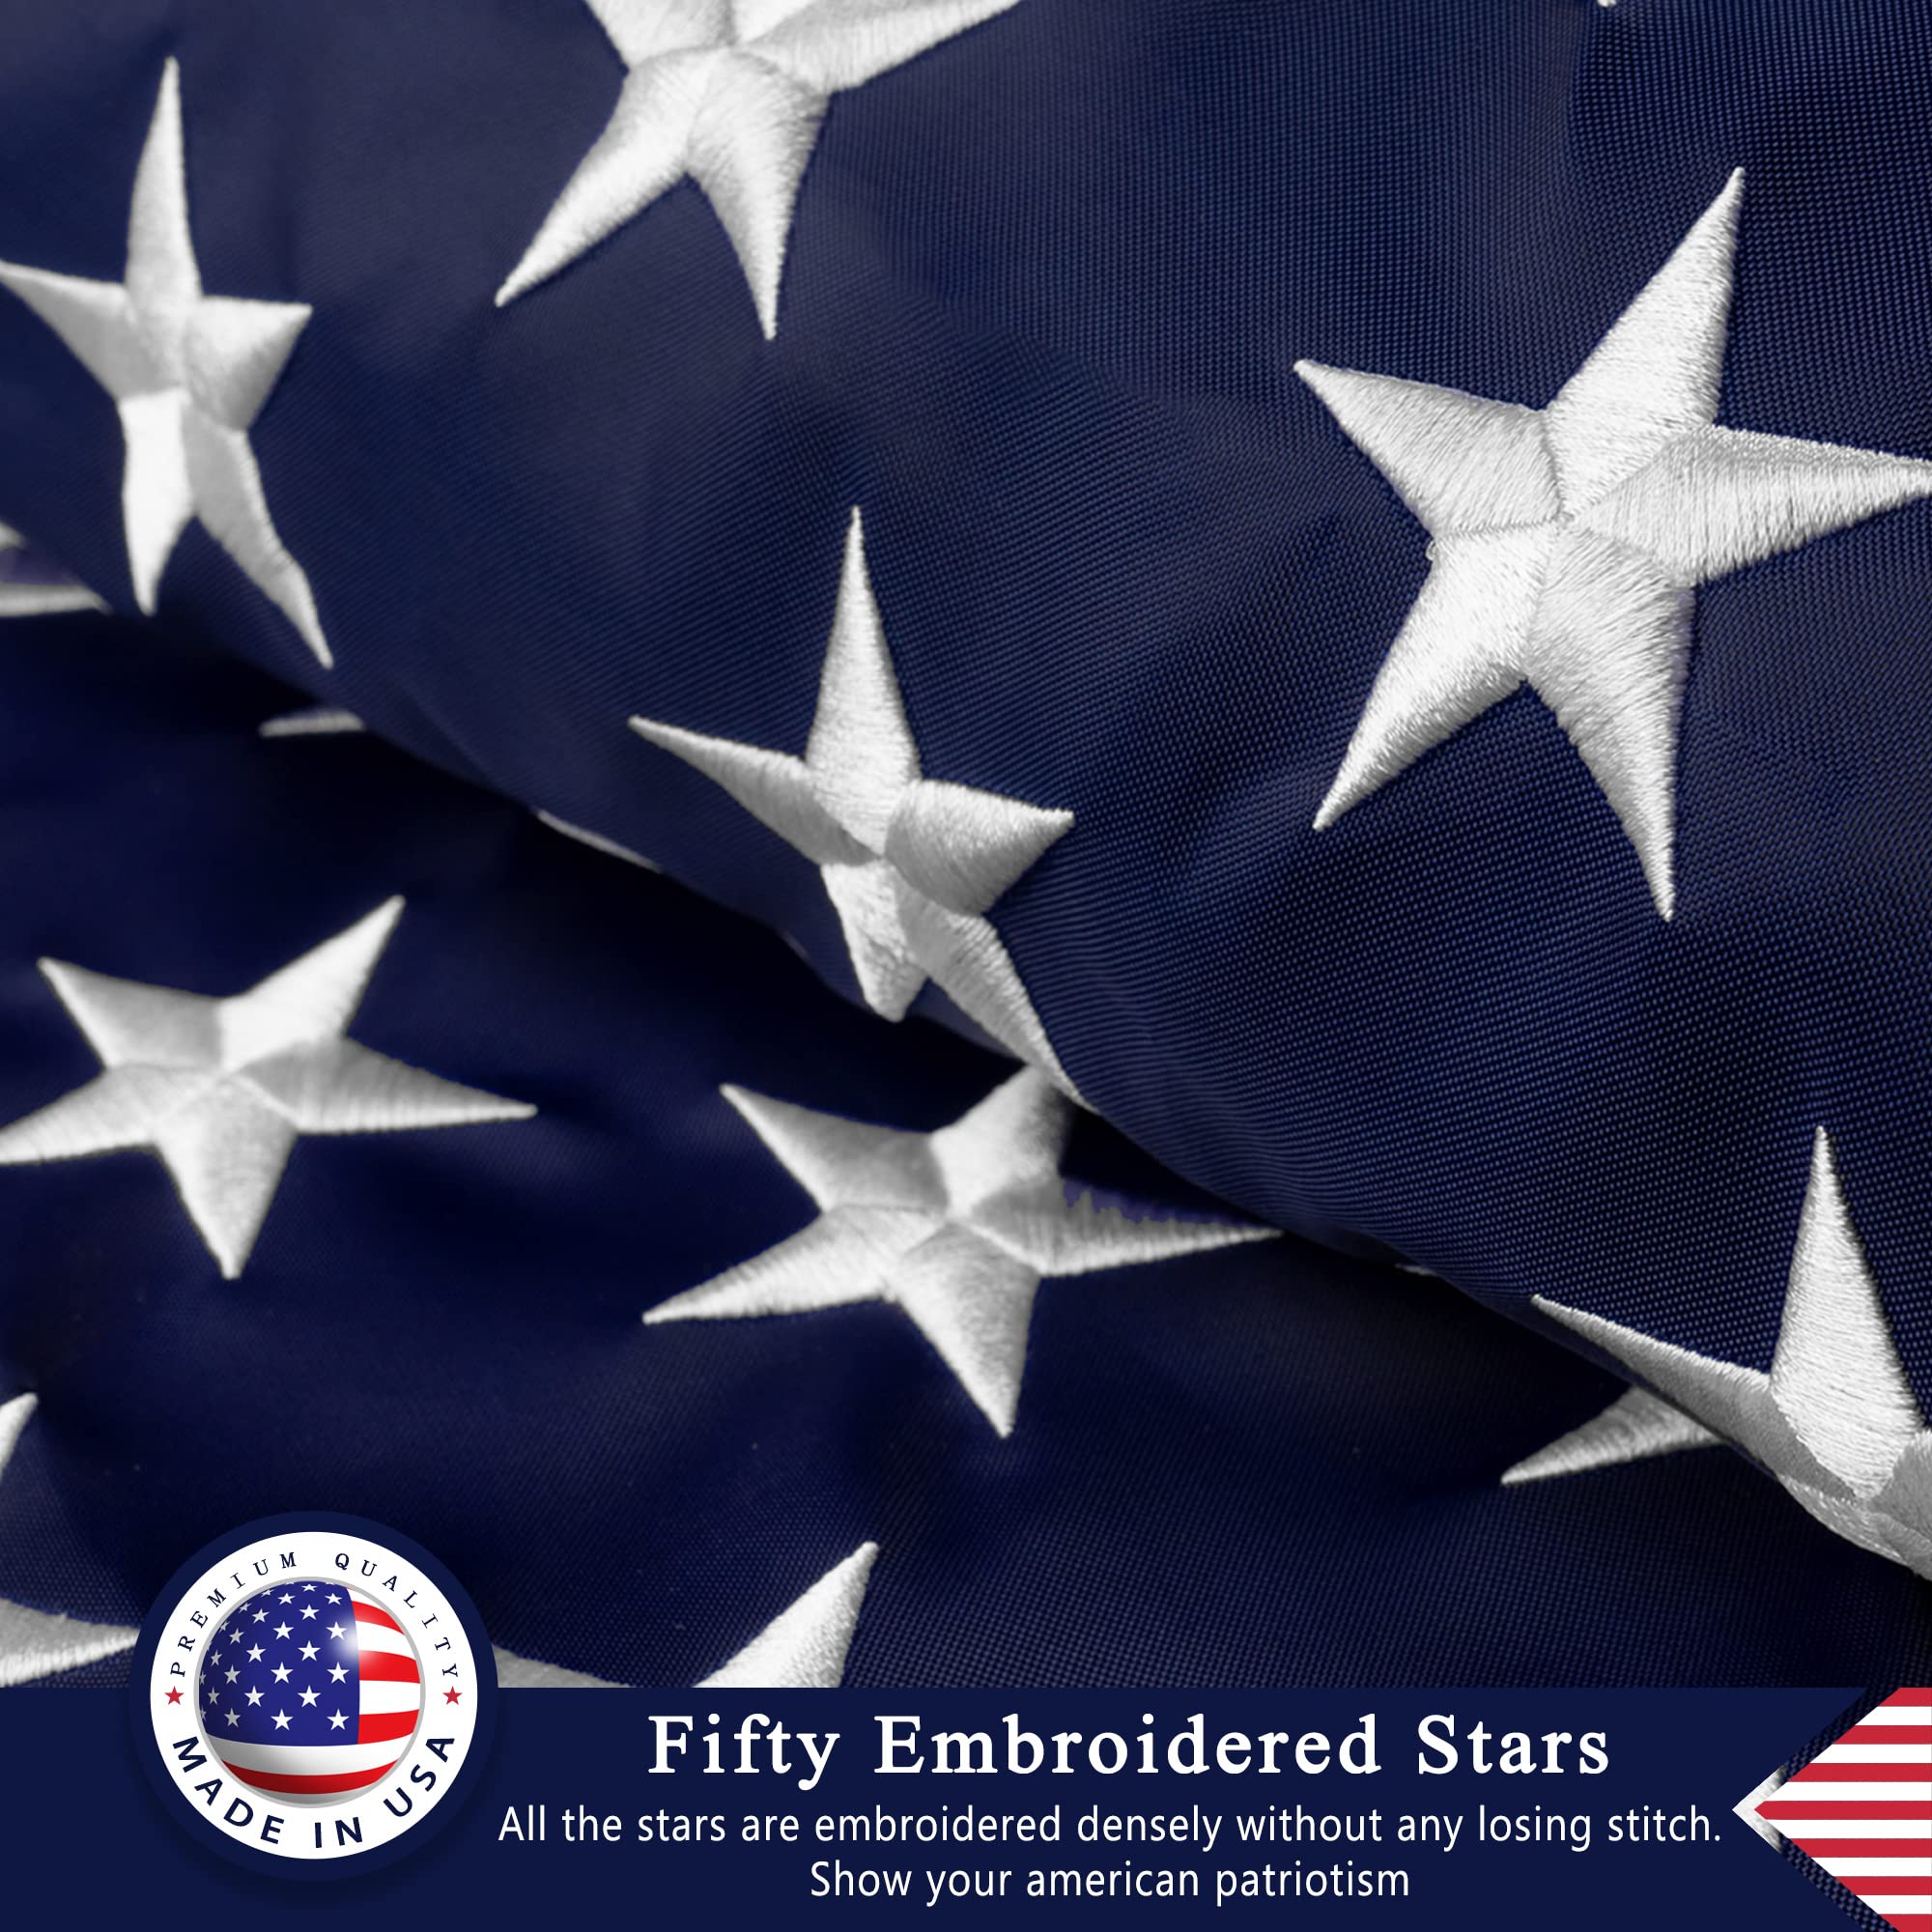 Pozoy American Flag 3x5 Outdoor Made in USA, Heavy Duty US United States Flags, The Best Embroidered Stars and Sewn Stripes, Brass Grommets, Longest Lasting Nylon American Flag 3x5 ft for Outside